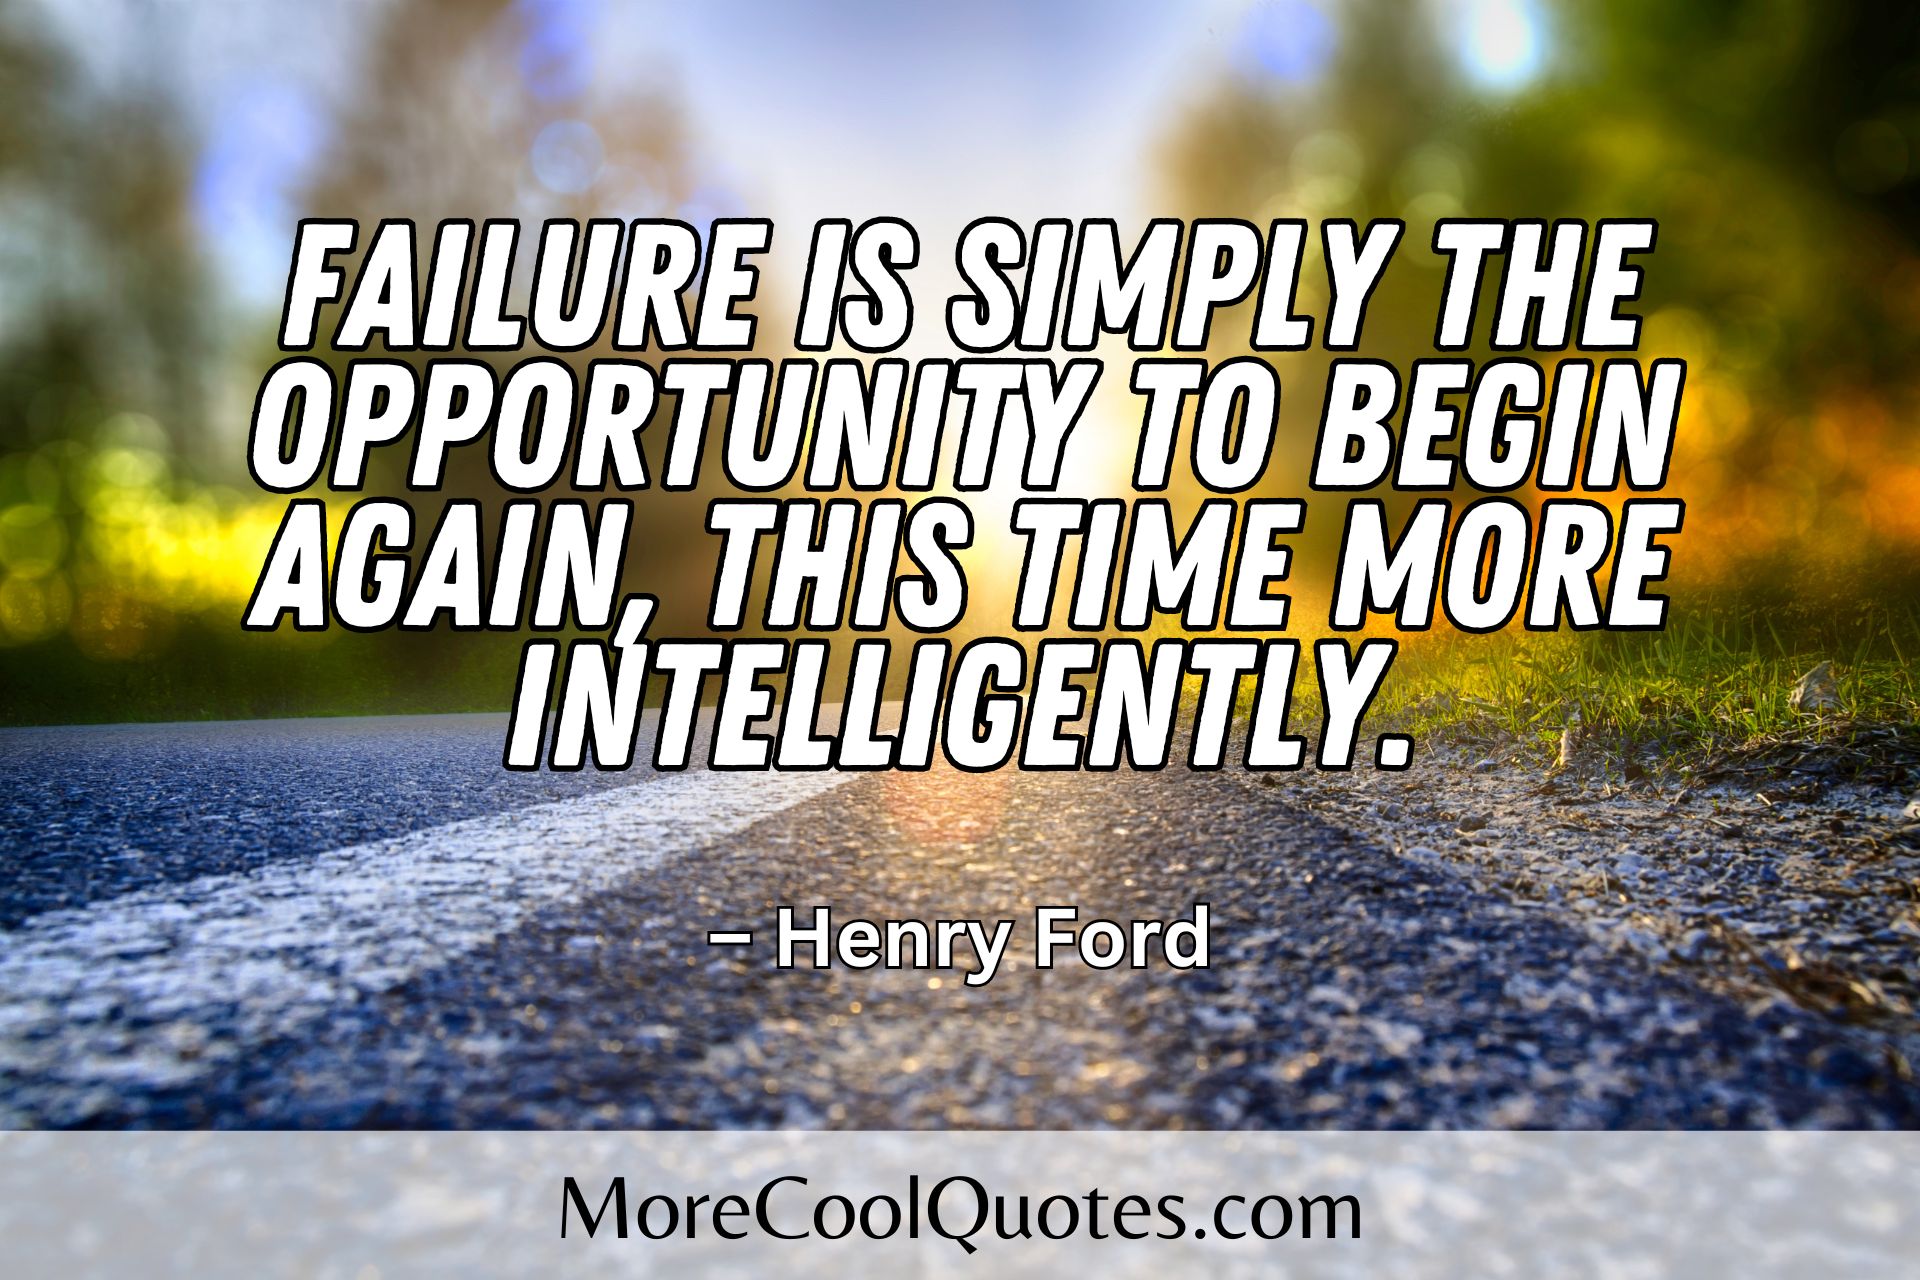 Henry Ford Quotes – The Top 44